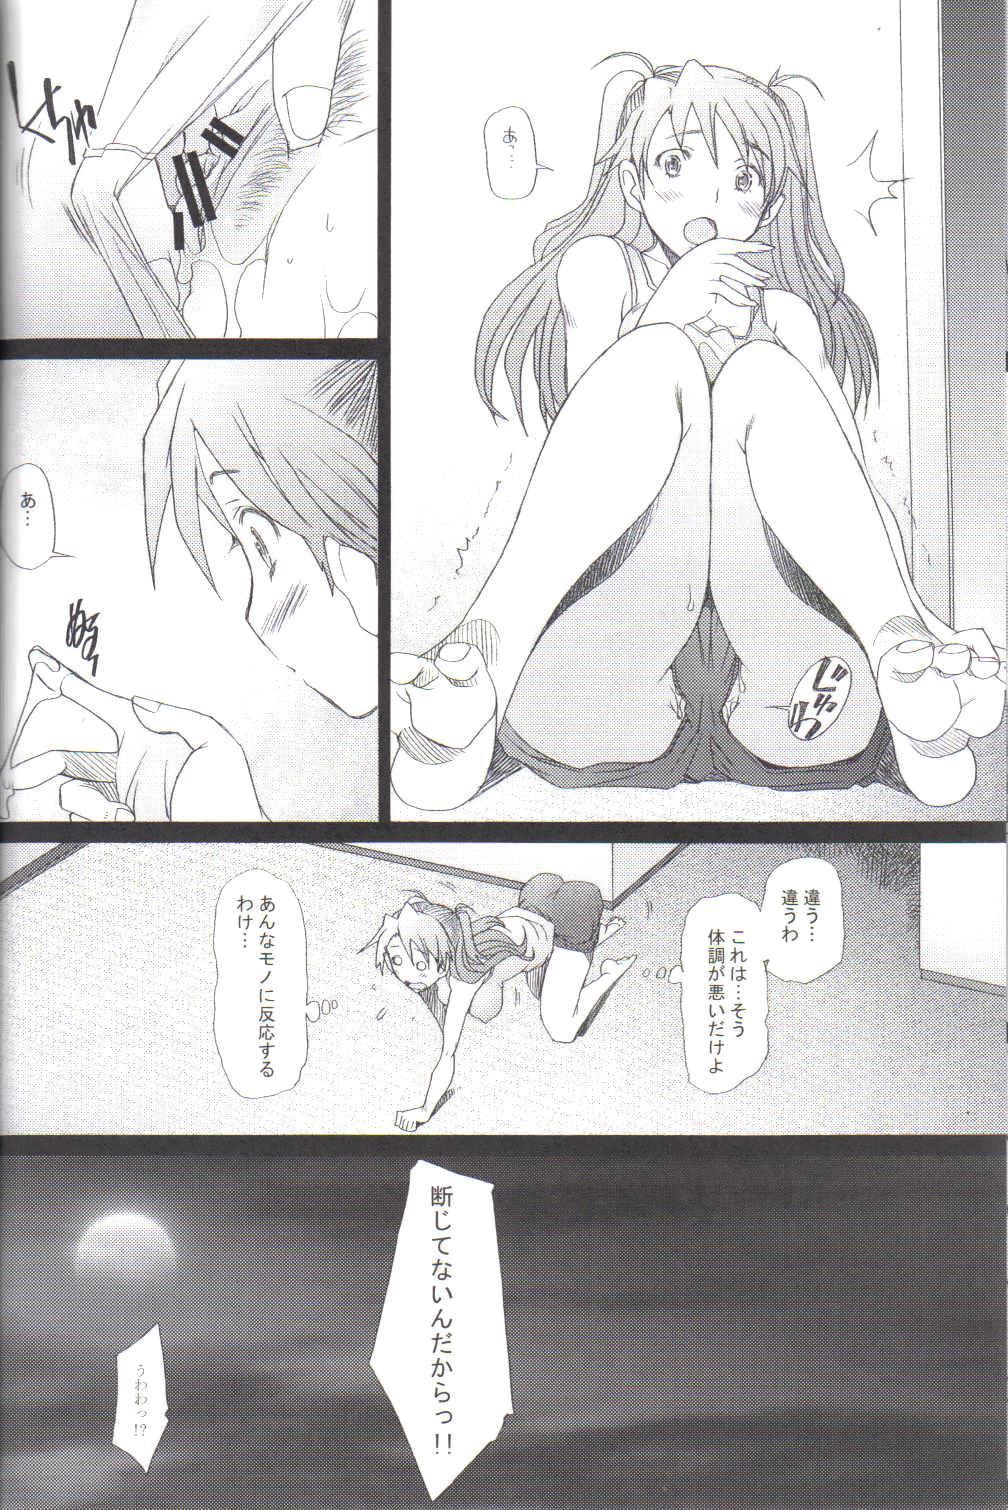 Curious Confusion LEVEL A - Neon genesis evangelion Maid - Page 6